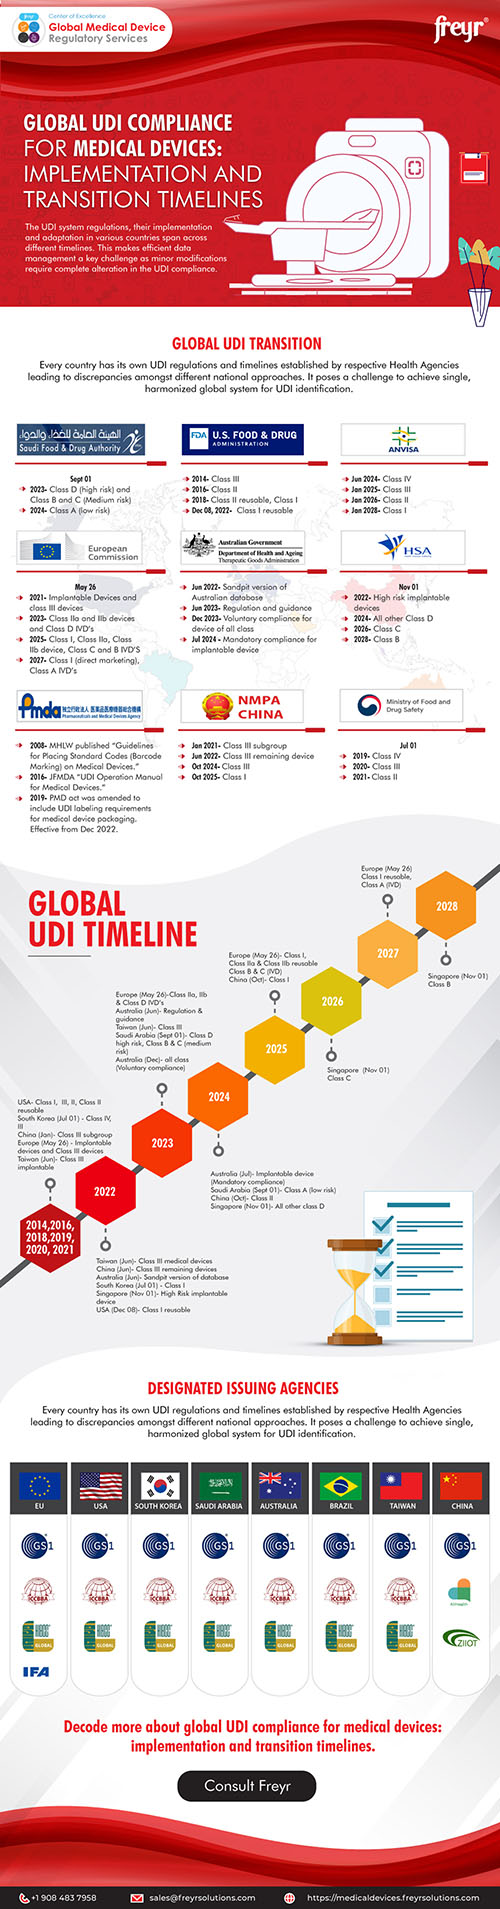 Global UDI Compliance for Medical Devices: Implementation and Transition Timelines